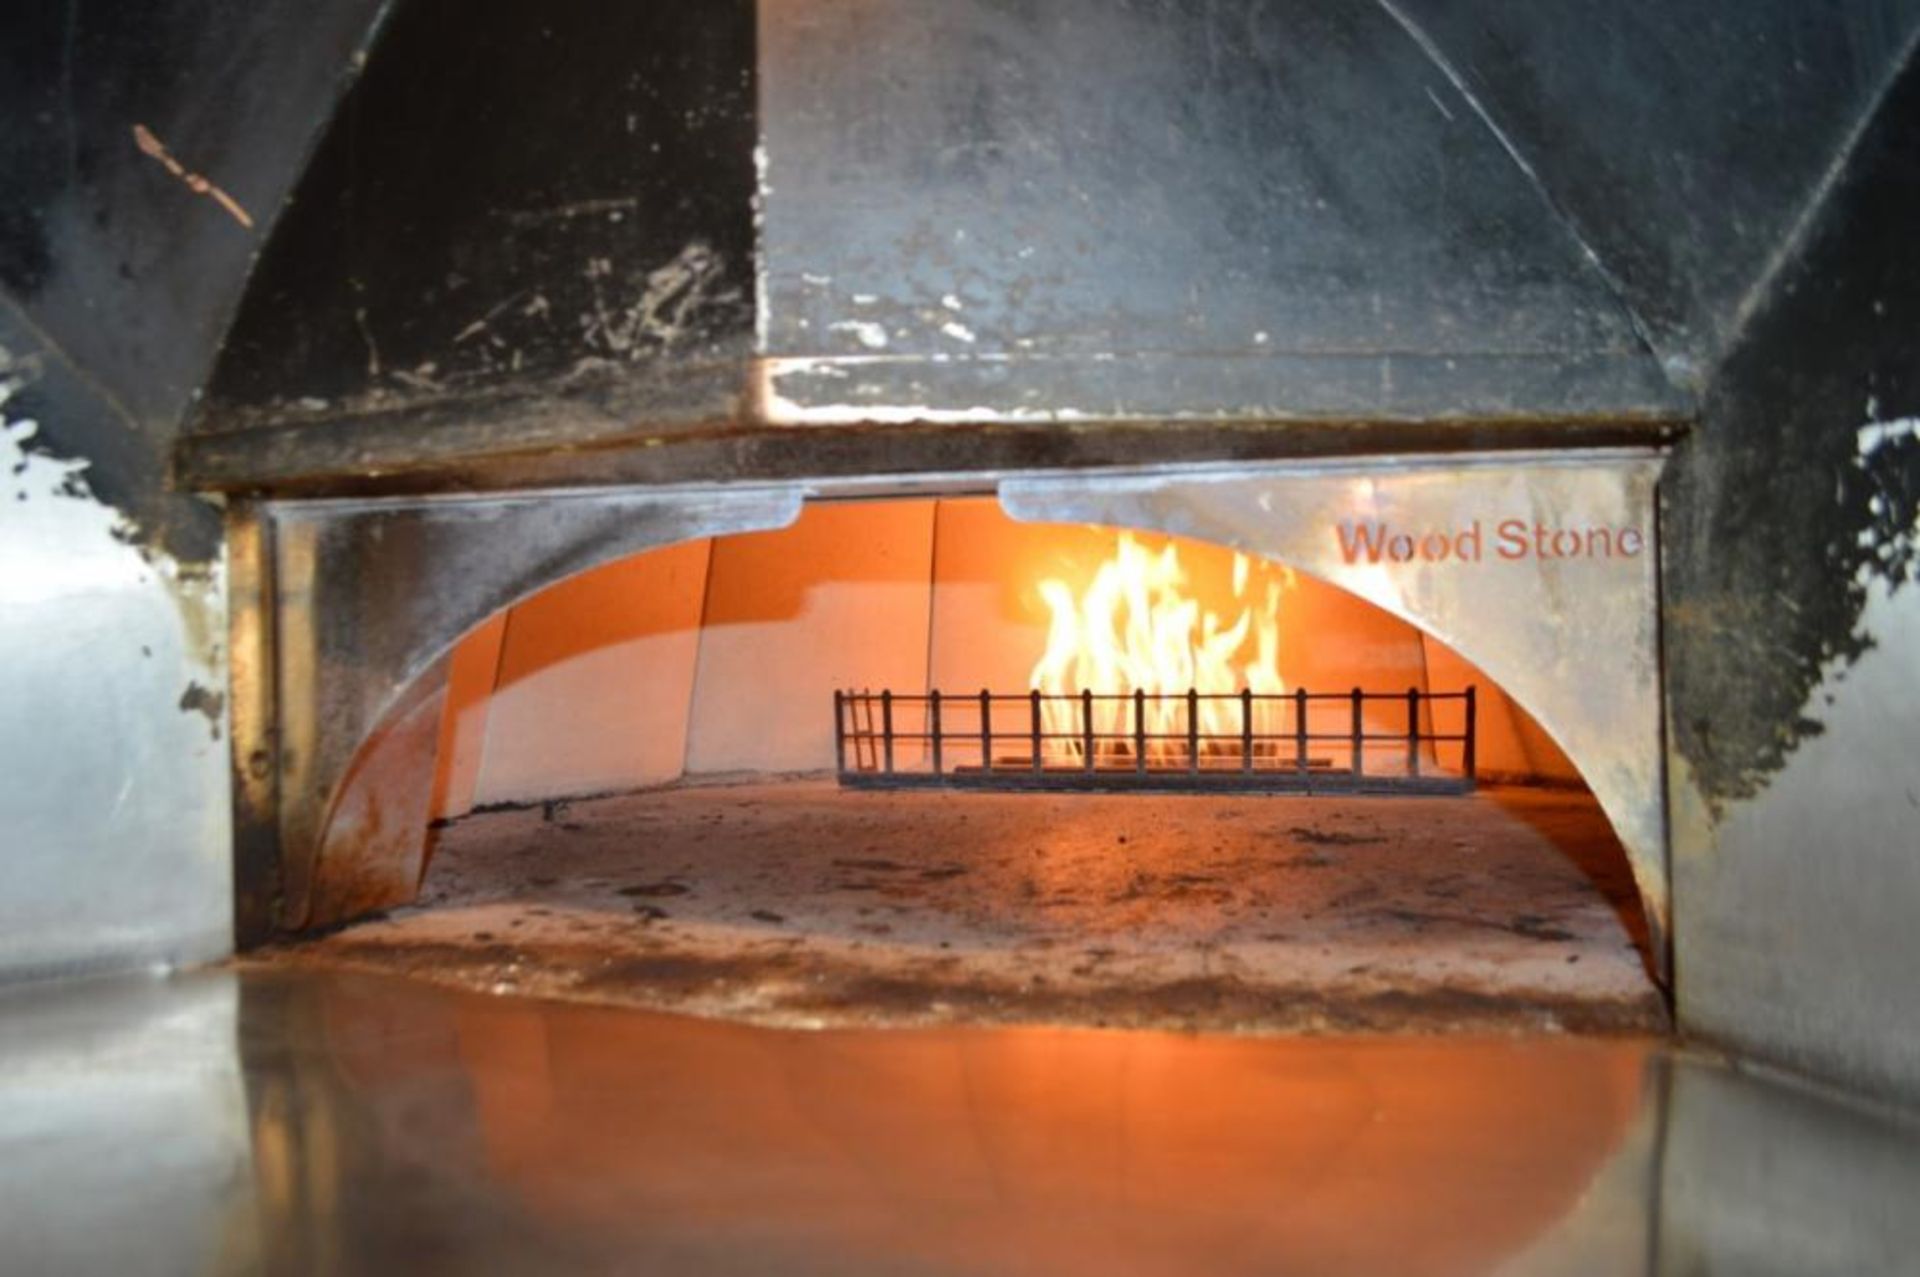 1 x Wood Stone Commercial Gas Fired Pizza Oven - CL011 - Location: Altrincham WA14 - Image 13 of 16